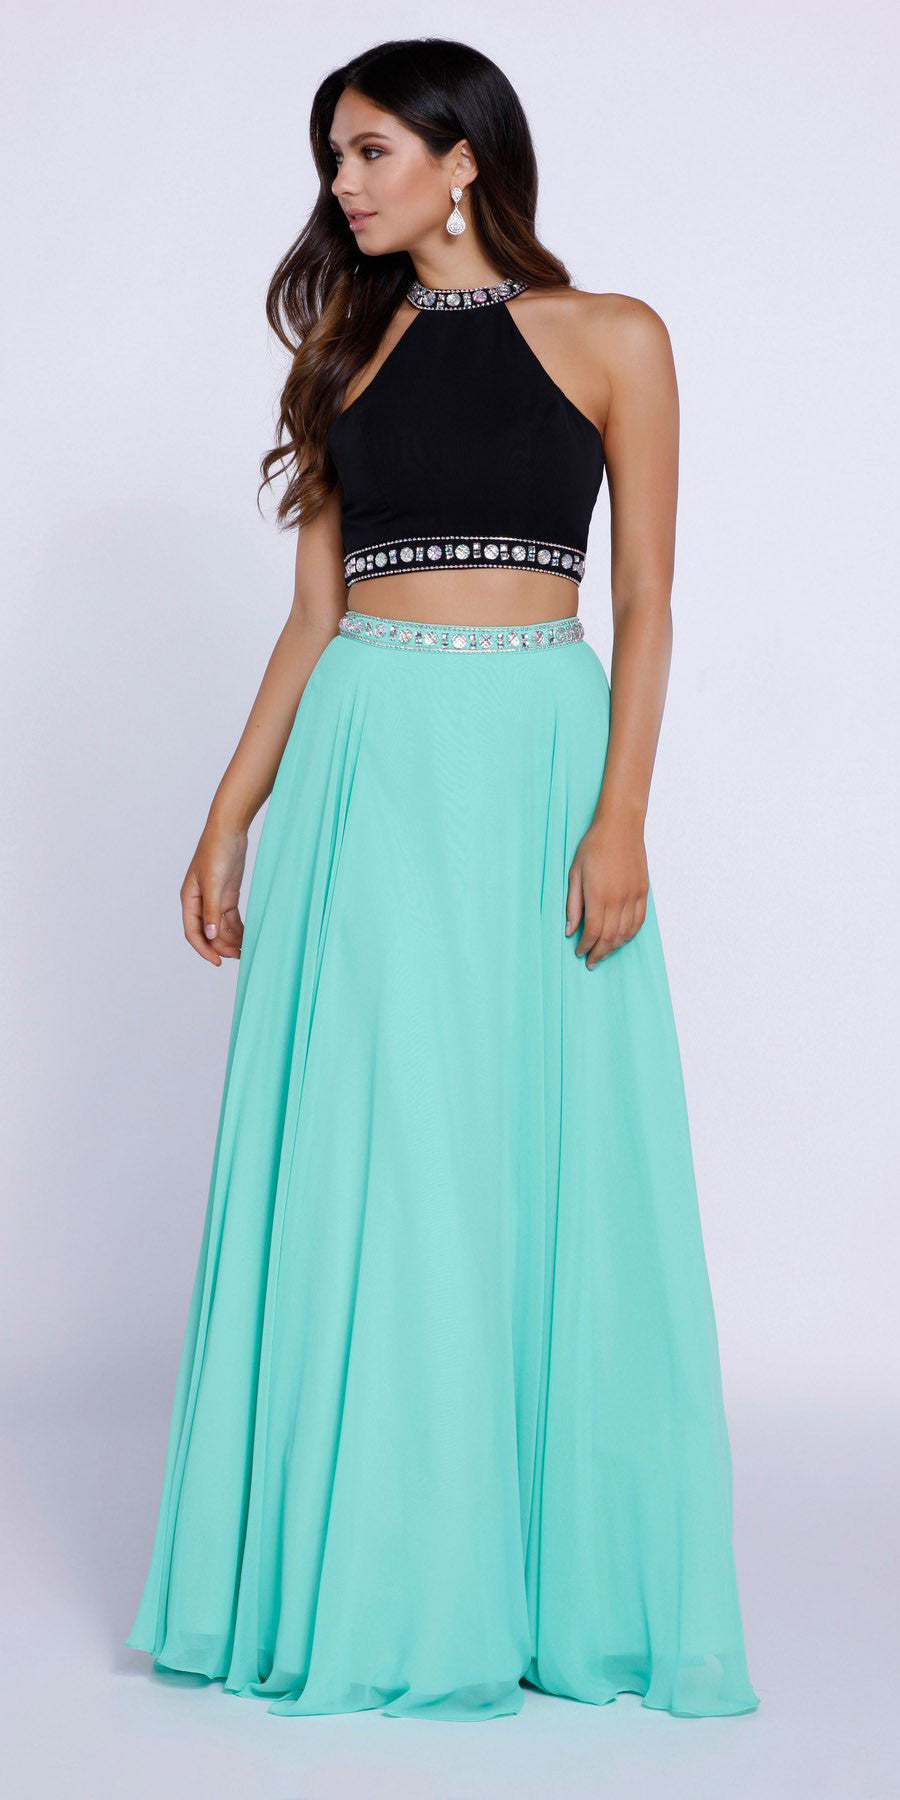 Chiffon Black and Mint Beaded Two-Piece Halter Prom Dress